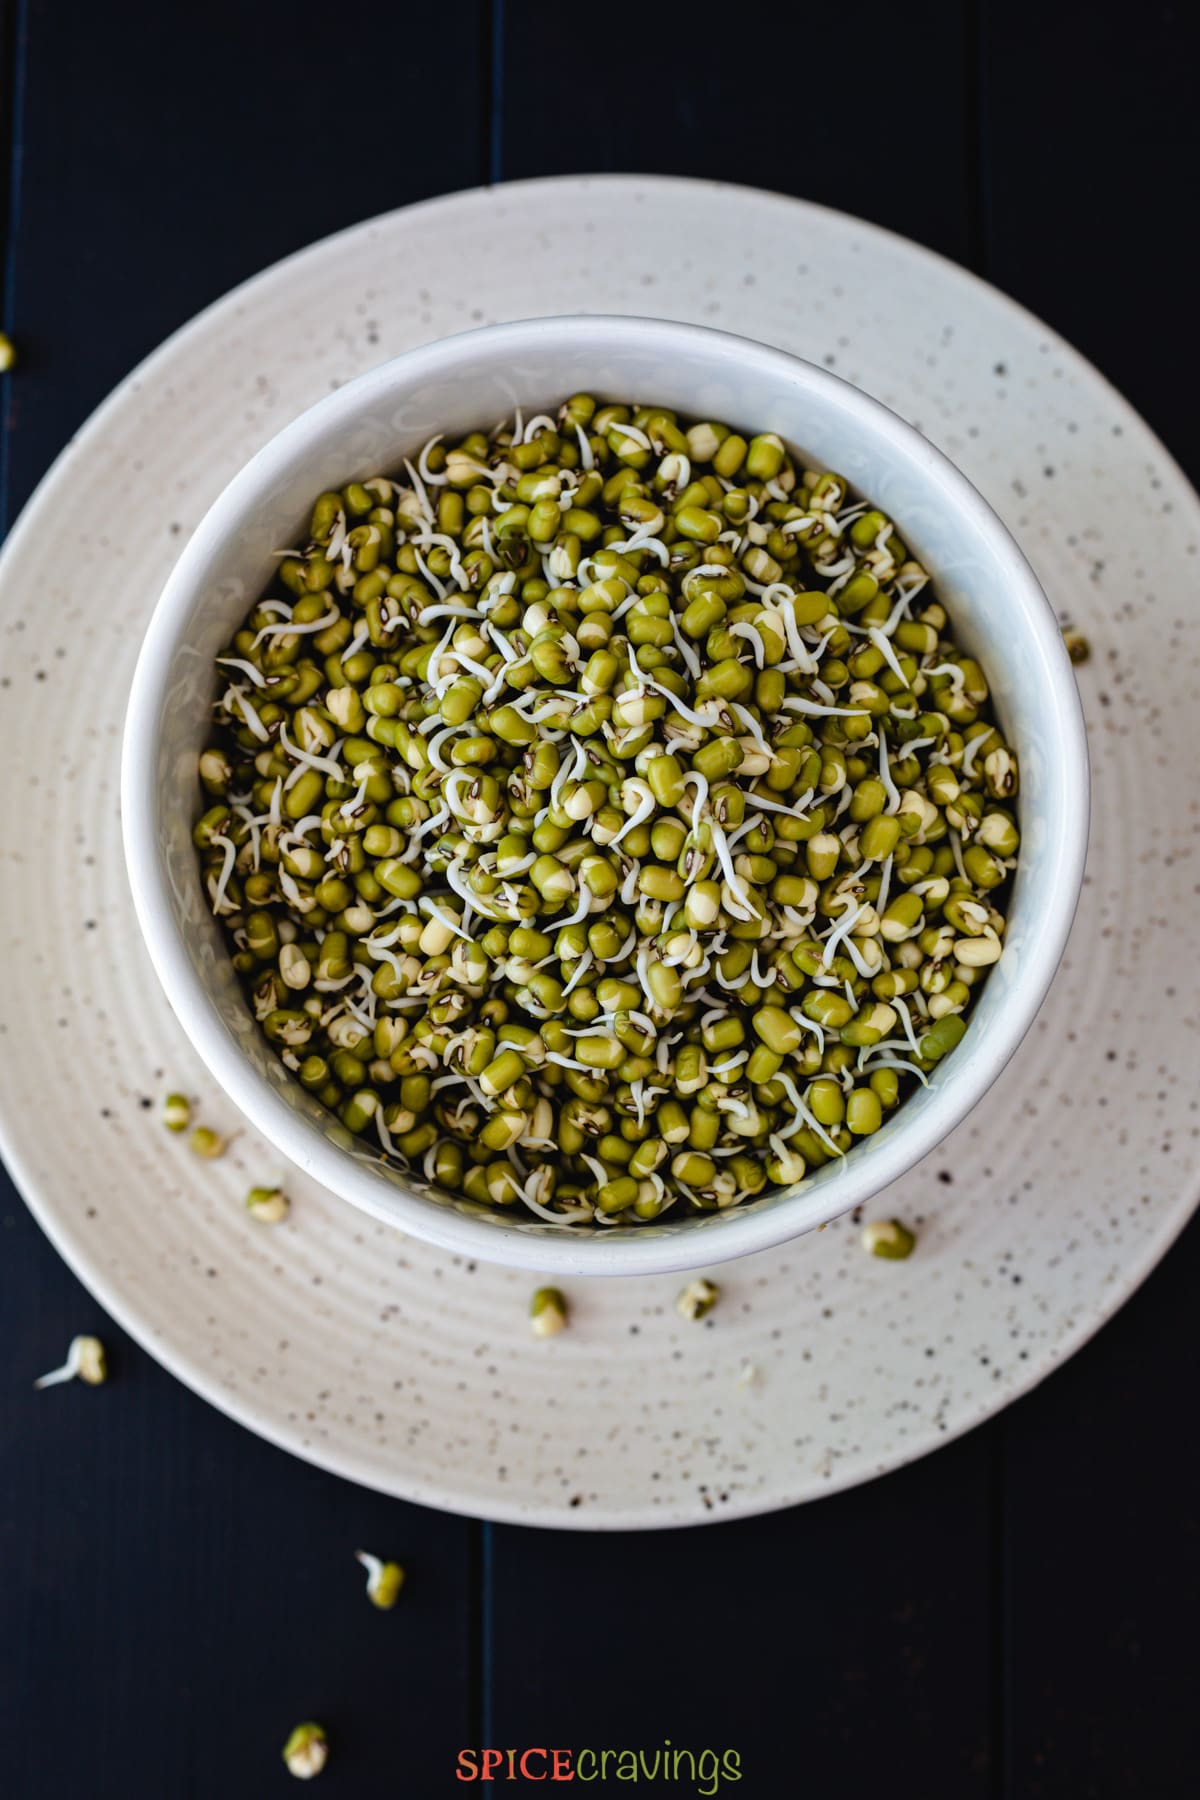 sprouted lentils in white bowl on plate